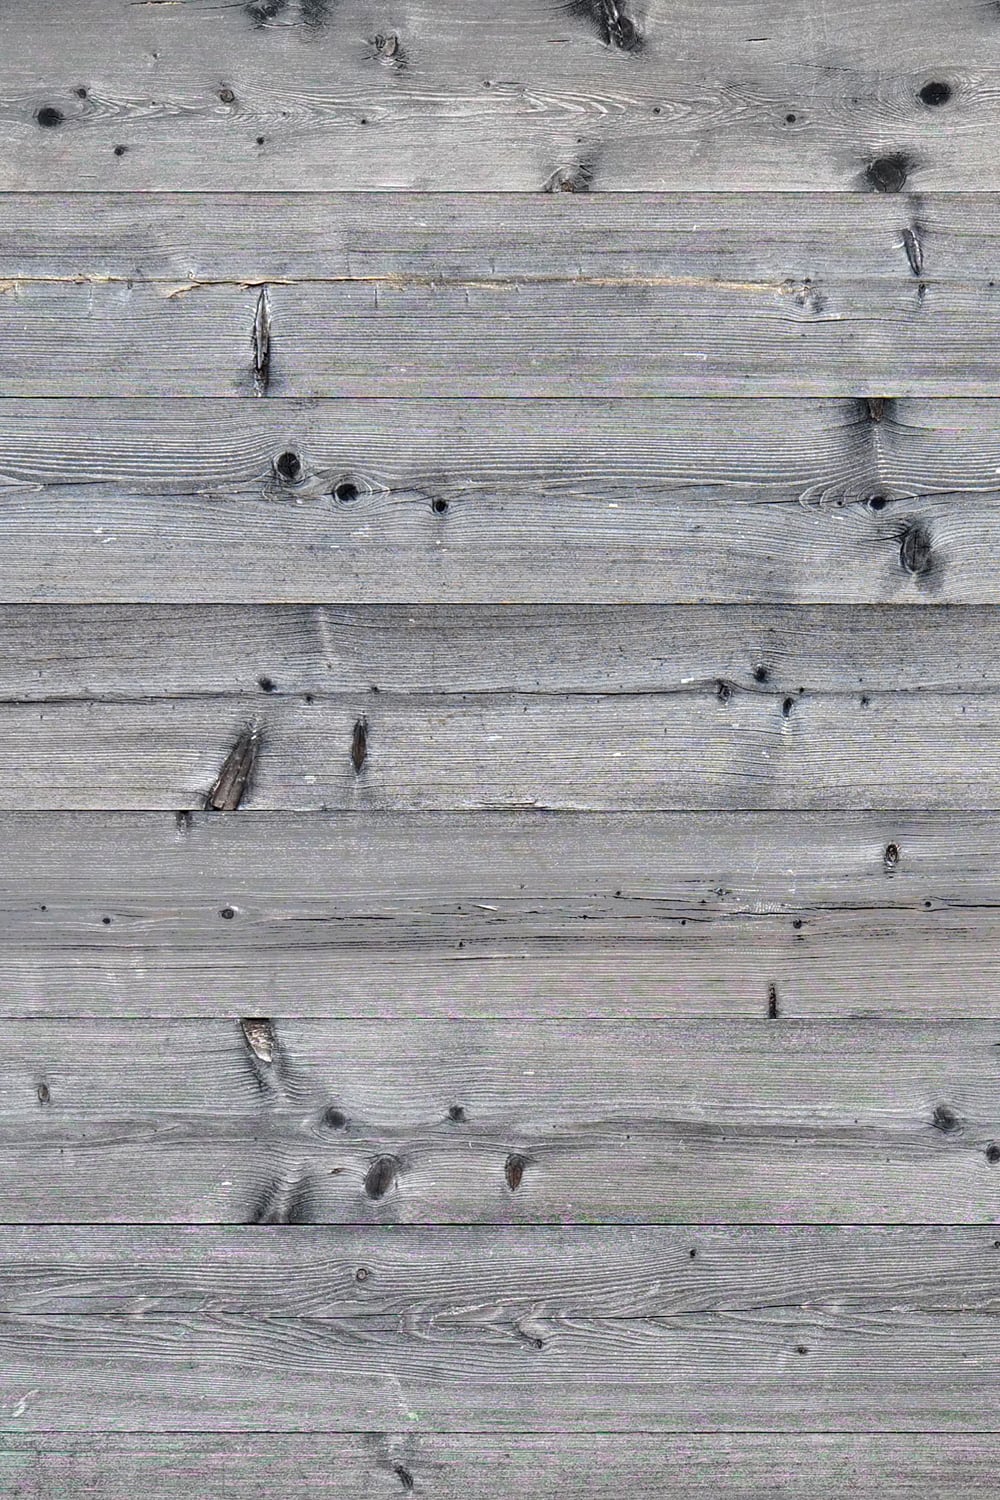 Unpainted wood plank fence - close-up